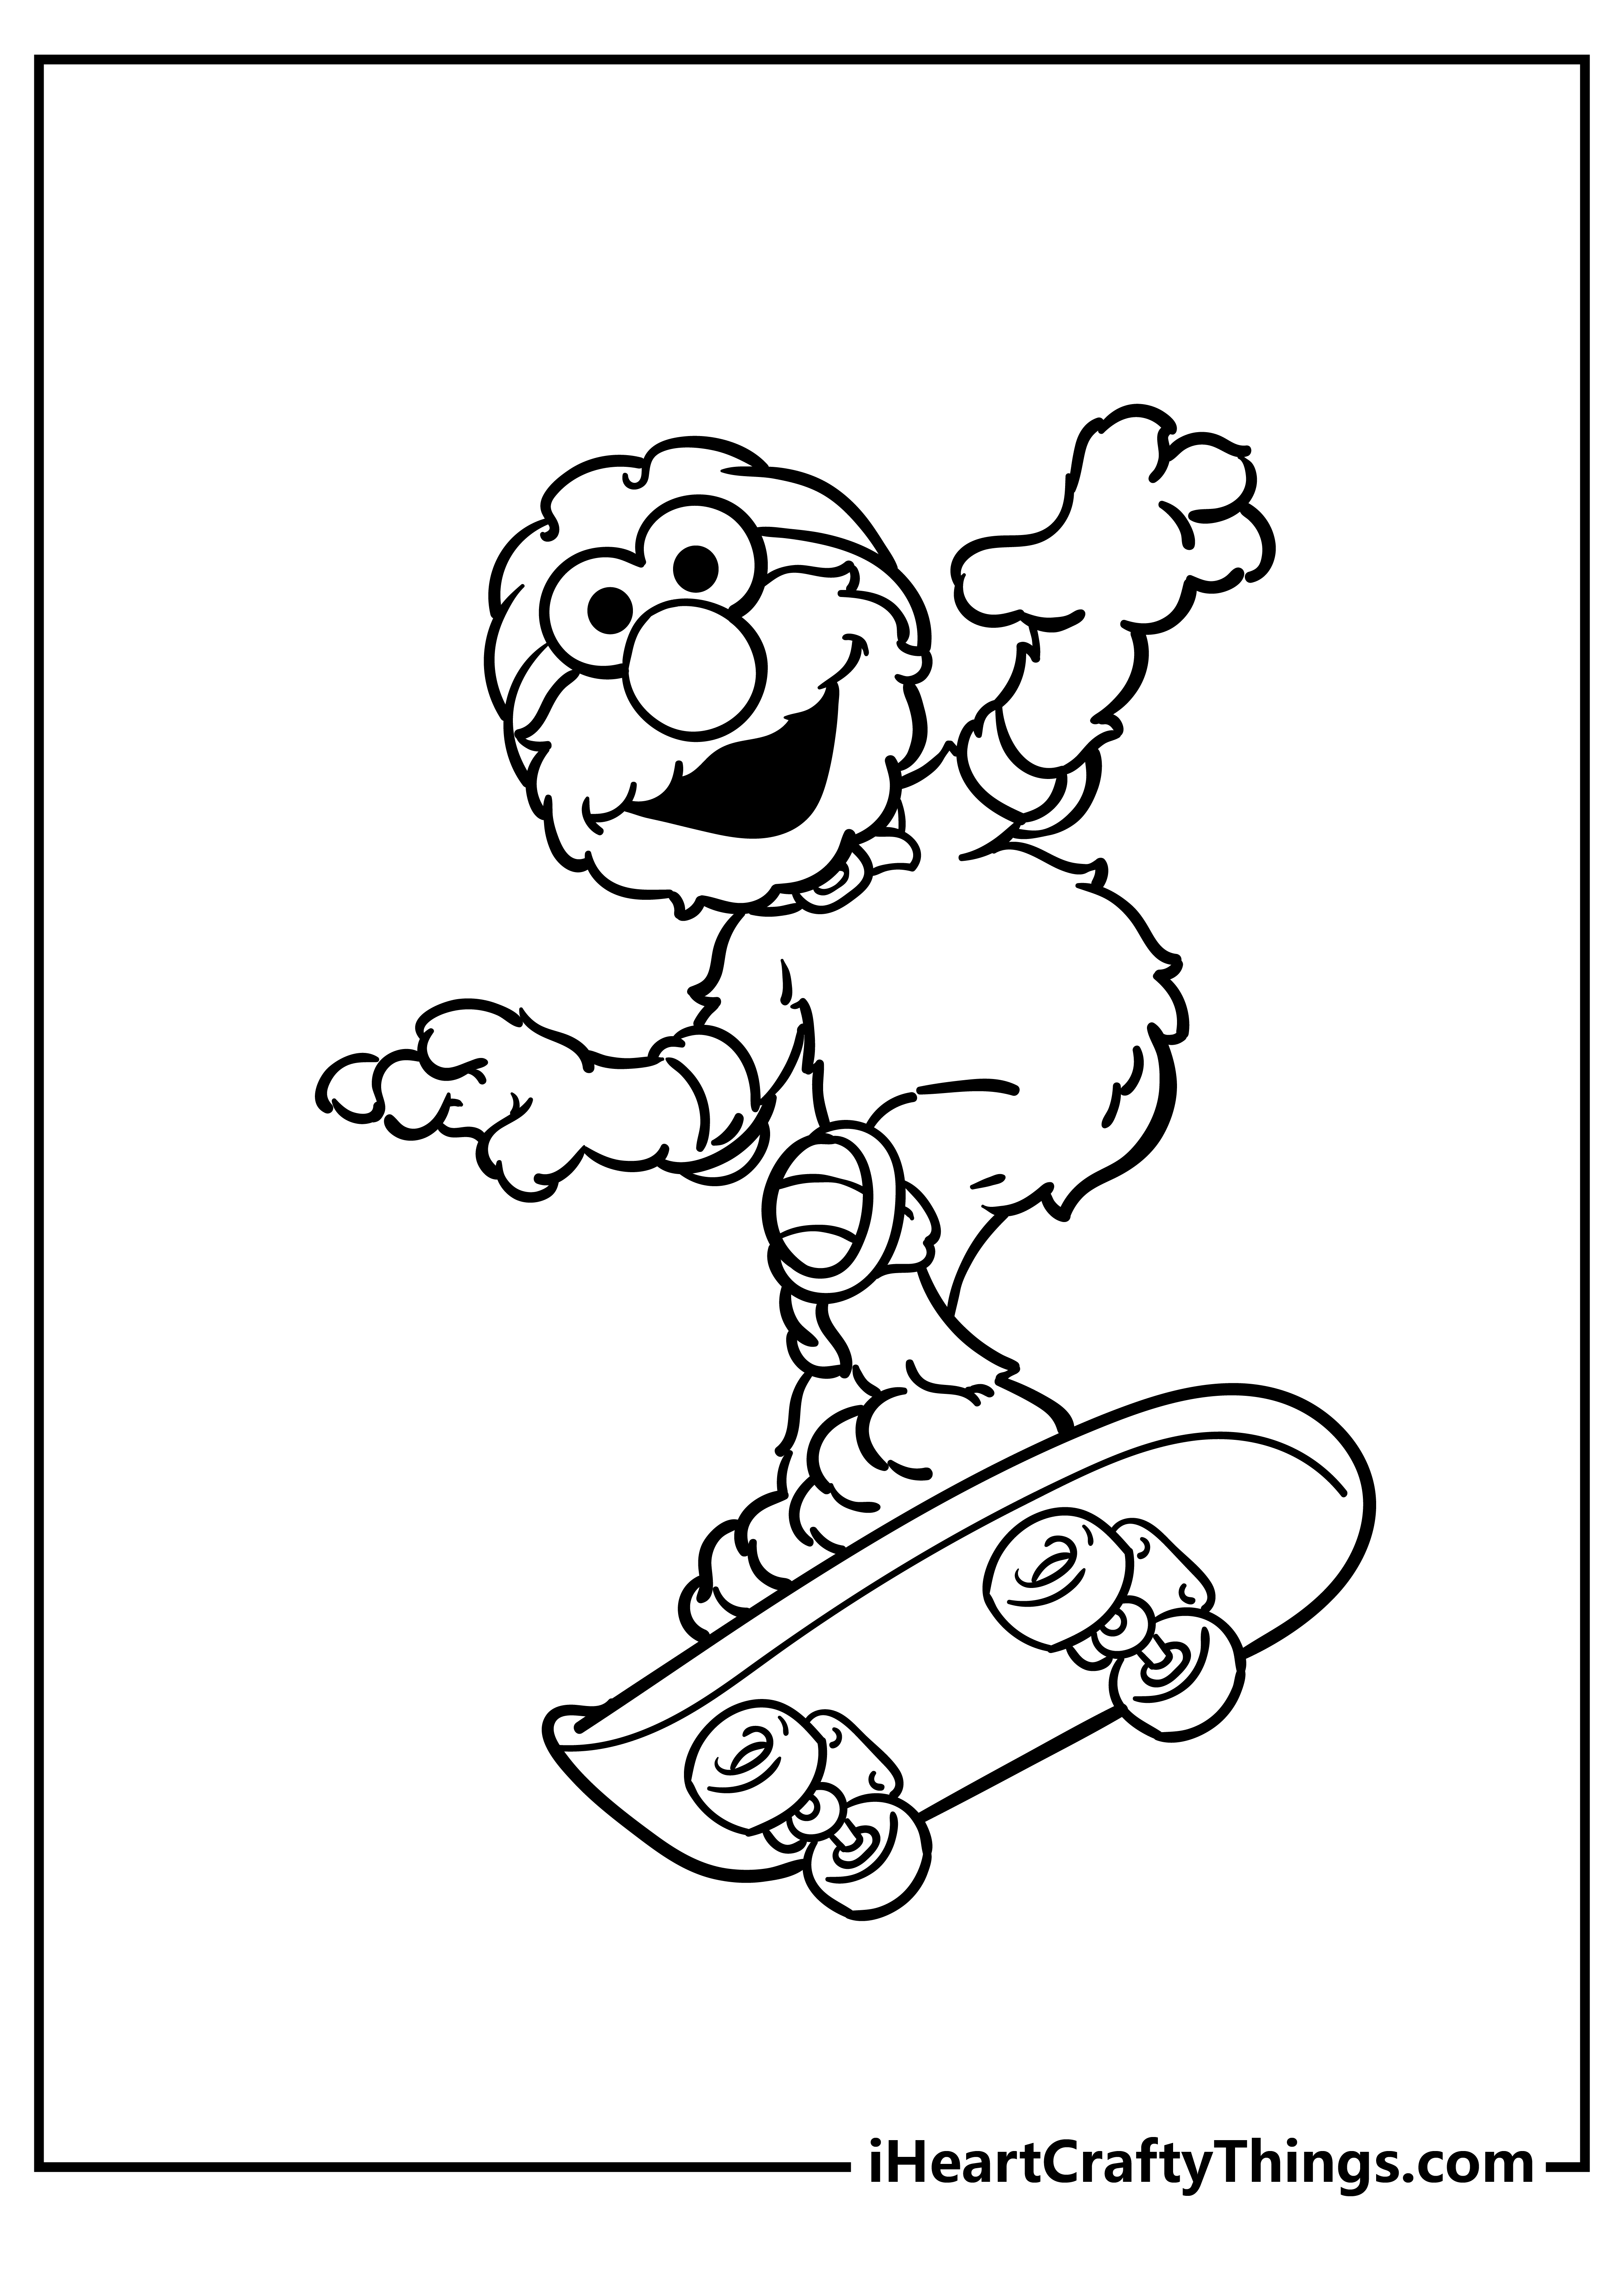 Elmo Easy Coloring Pages